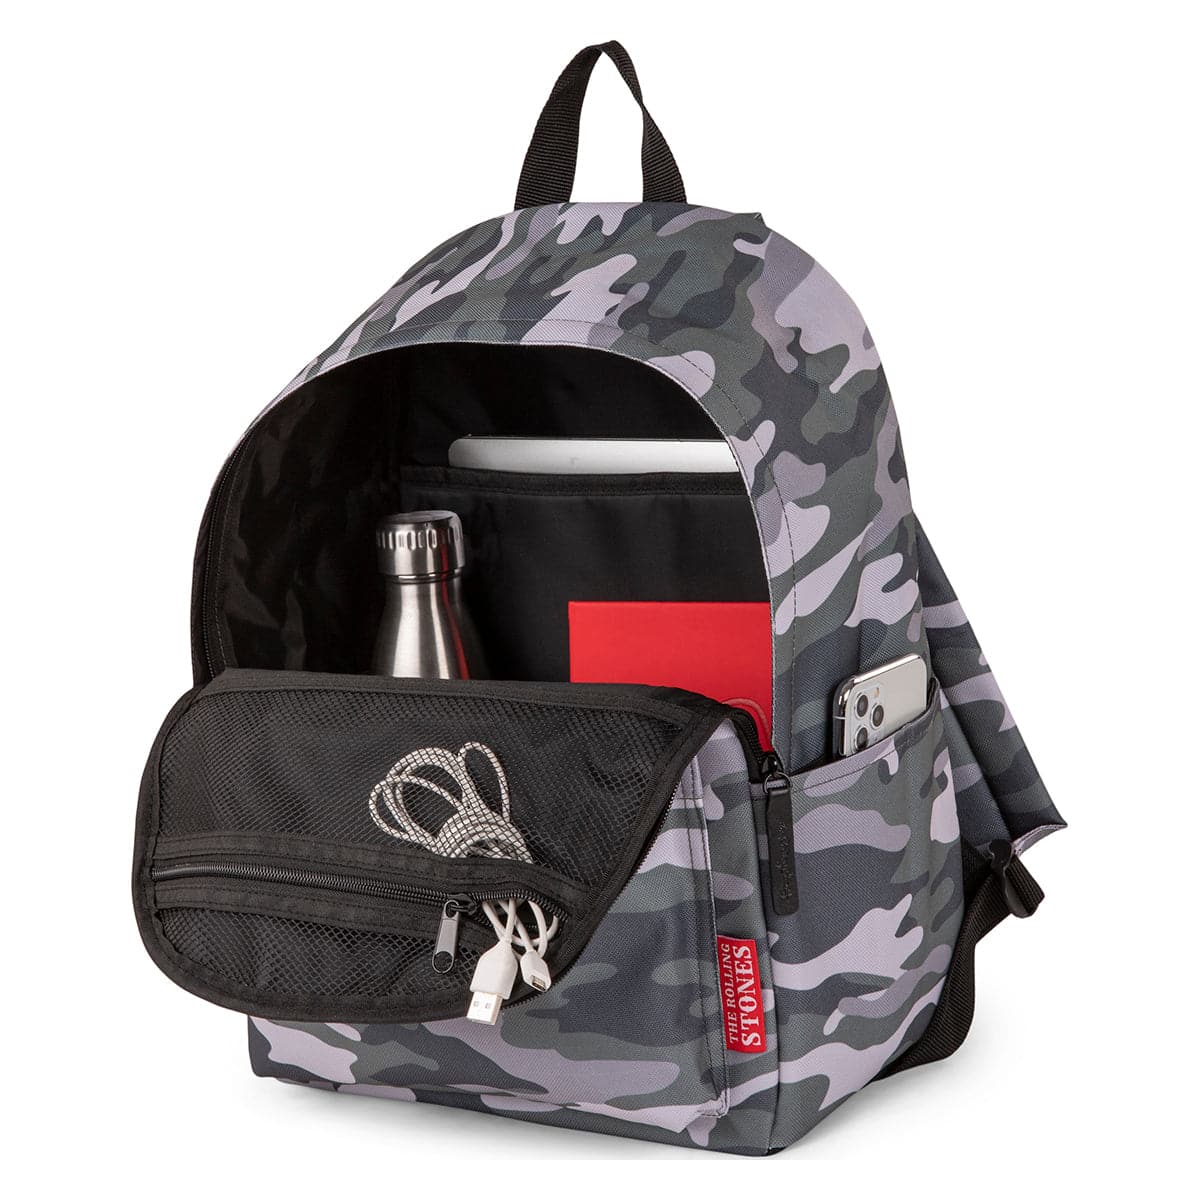 The Rolling Stones The Core Backpack